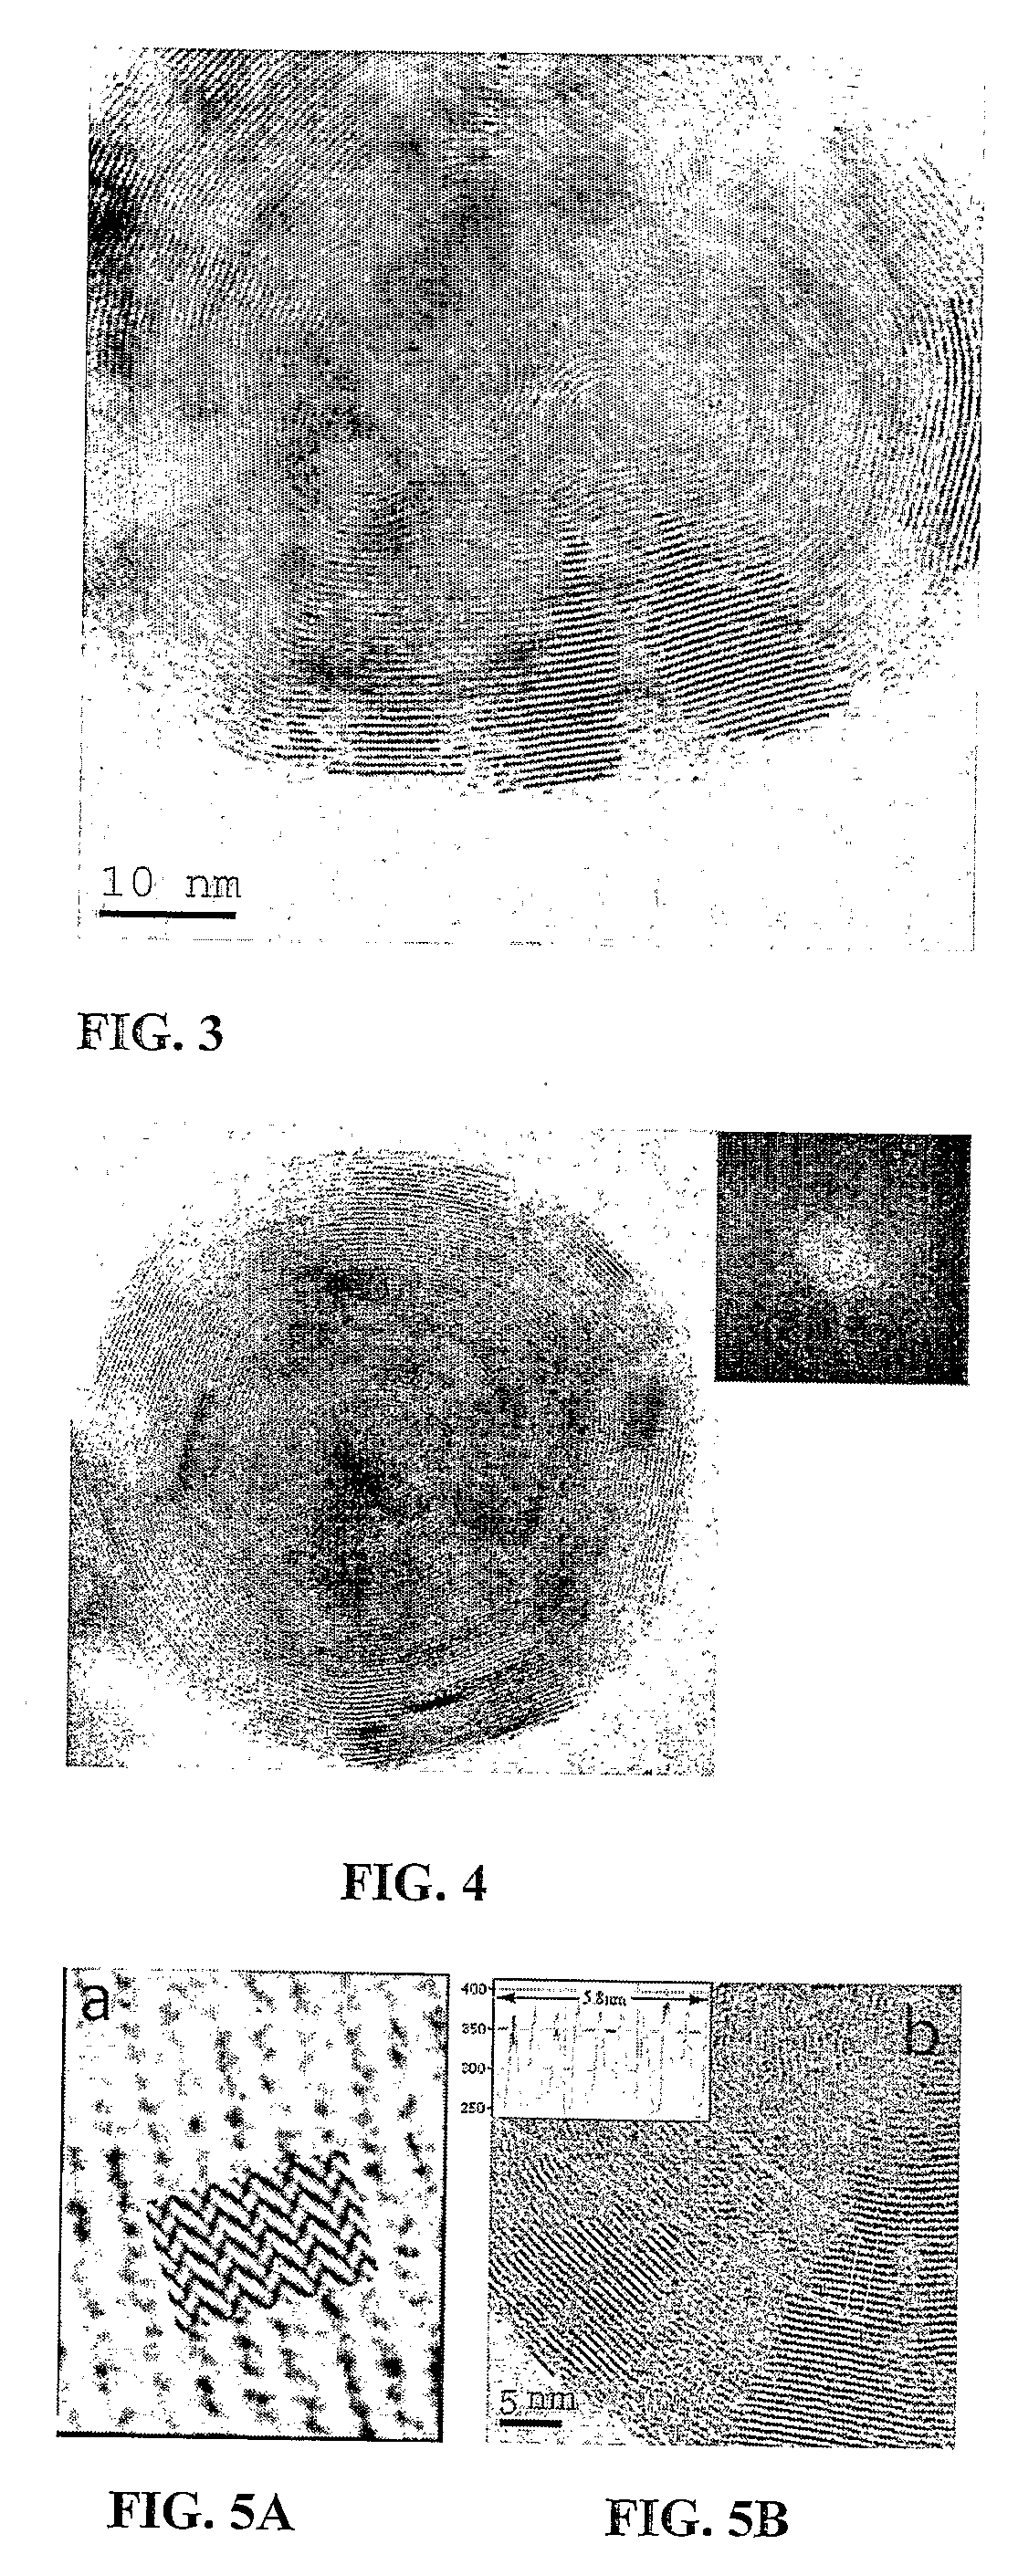 Process and apparatus for producing inorganic fullerene-like nanoparticles